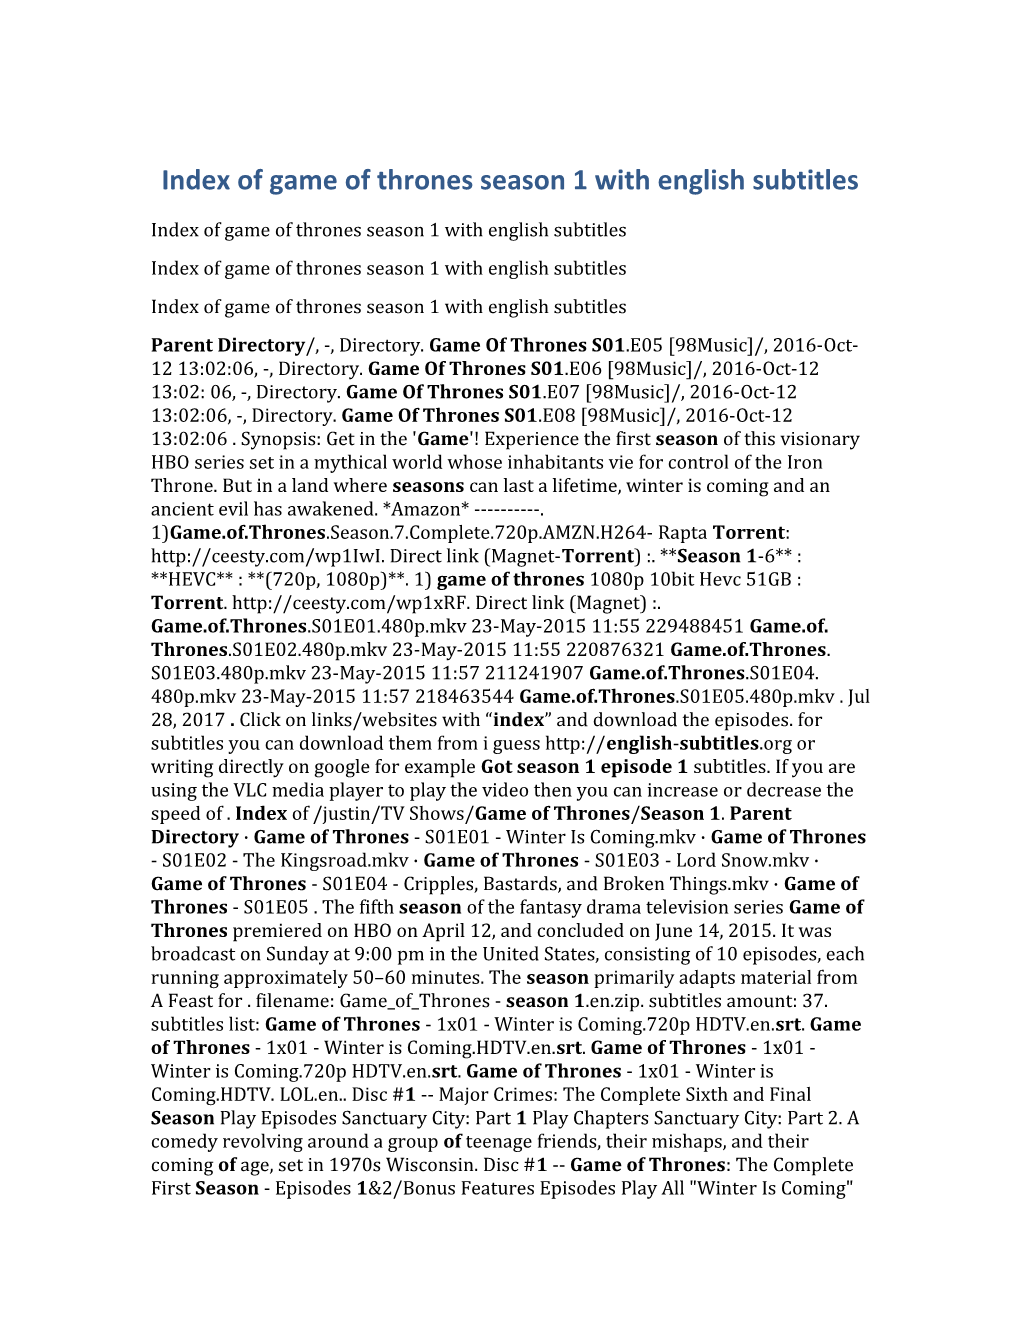 Index of Game of Thrones Season 1 with English Subtitles